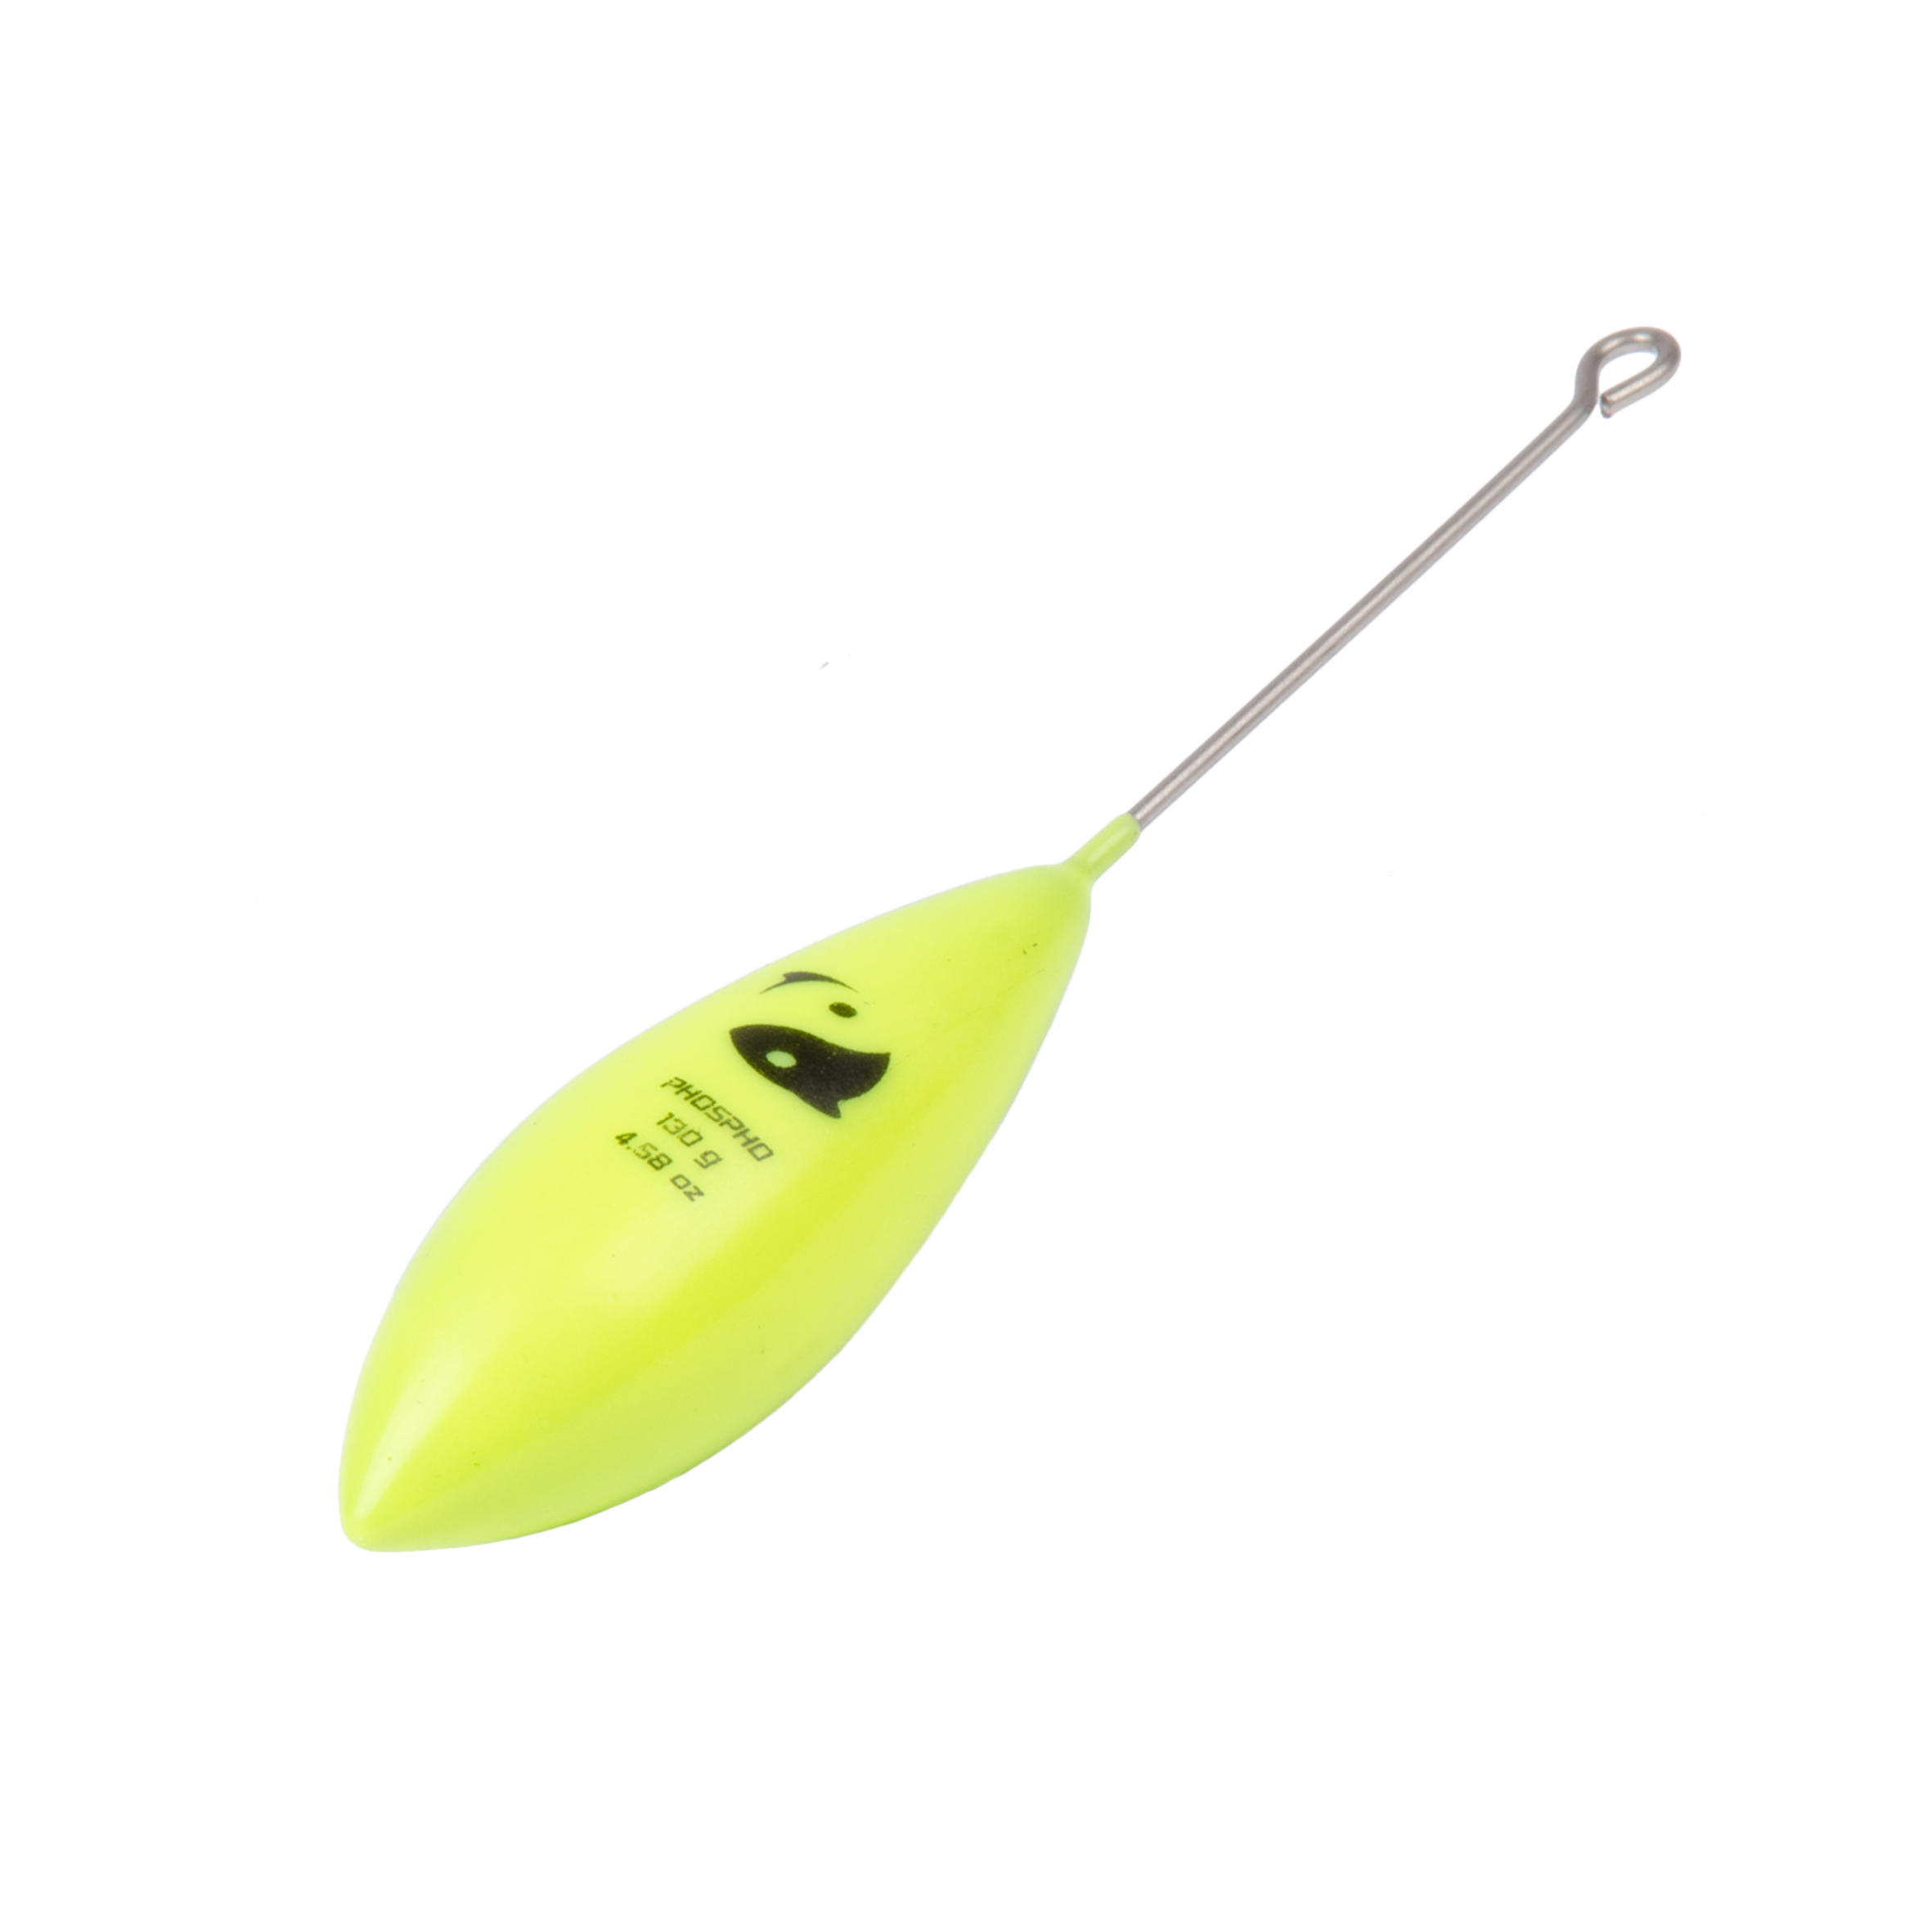 CAPERLAN Fishing Surfcasting Bomb Sinker with Long Tail x2 - Phosphorescent Yellow